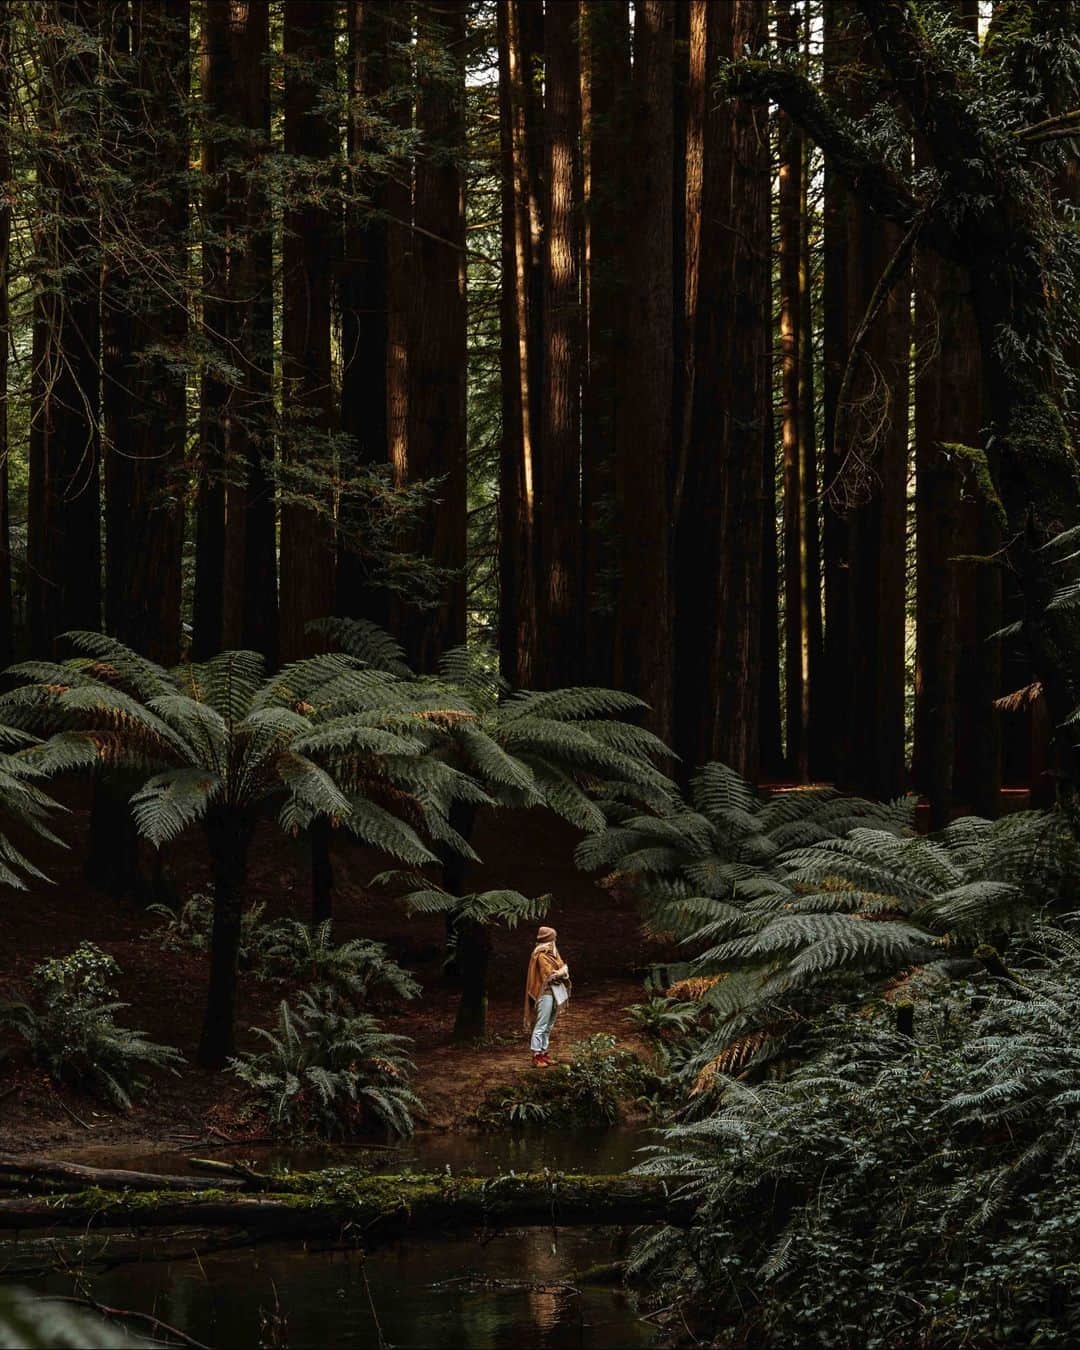 Australiaのインスタグラム：「Did someone say fairytale forest? 🧚🌳 With towering redwoods and outstretched ferns, the other-worldly landscape of #OtwayNationalPark has you covered 💚 A cruisy 3 hour drive from Narrm (@visitmelbourne) you'll find this gem along the #GreatOceanRoad, where you're sure to be humbled by the sheer size of the park's ancient flora. Spend a morning chasing waterfalls, then join a wheelchair accessible tour with @wildlifewondersaus to find adorable bushland creatures 🐨 Rest and recharge at the luxurious @chocolategannets beachfront villas in nearby #ApolloBay.   #SeeAustralia #ComeAndSayGday #VisitVictoria #Greatopia  ID: a woman stands in a dense forest. Green ferns and tall trees rise up all around her.」